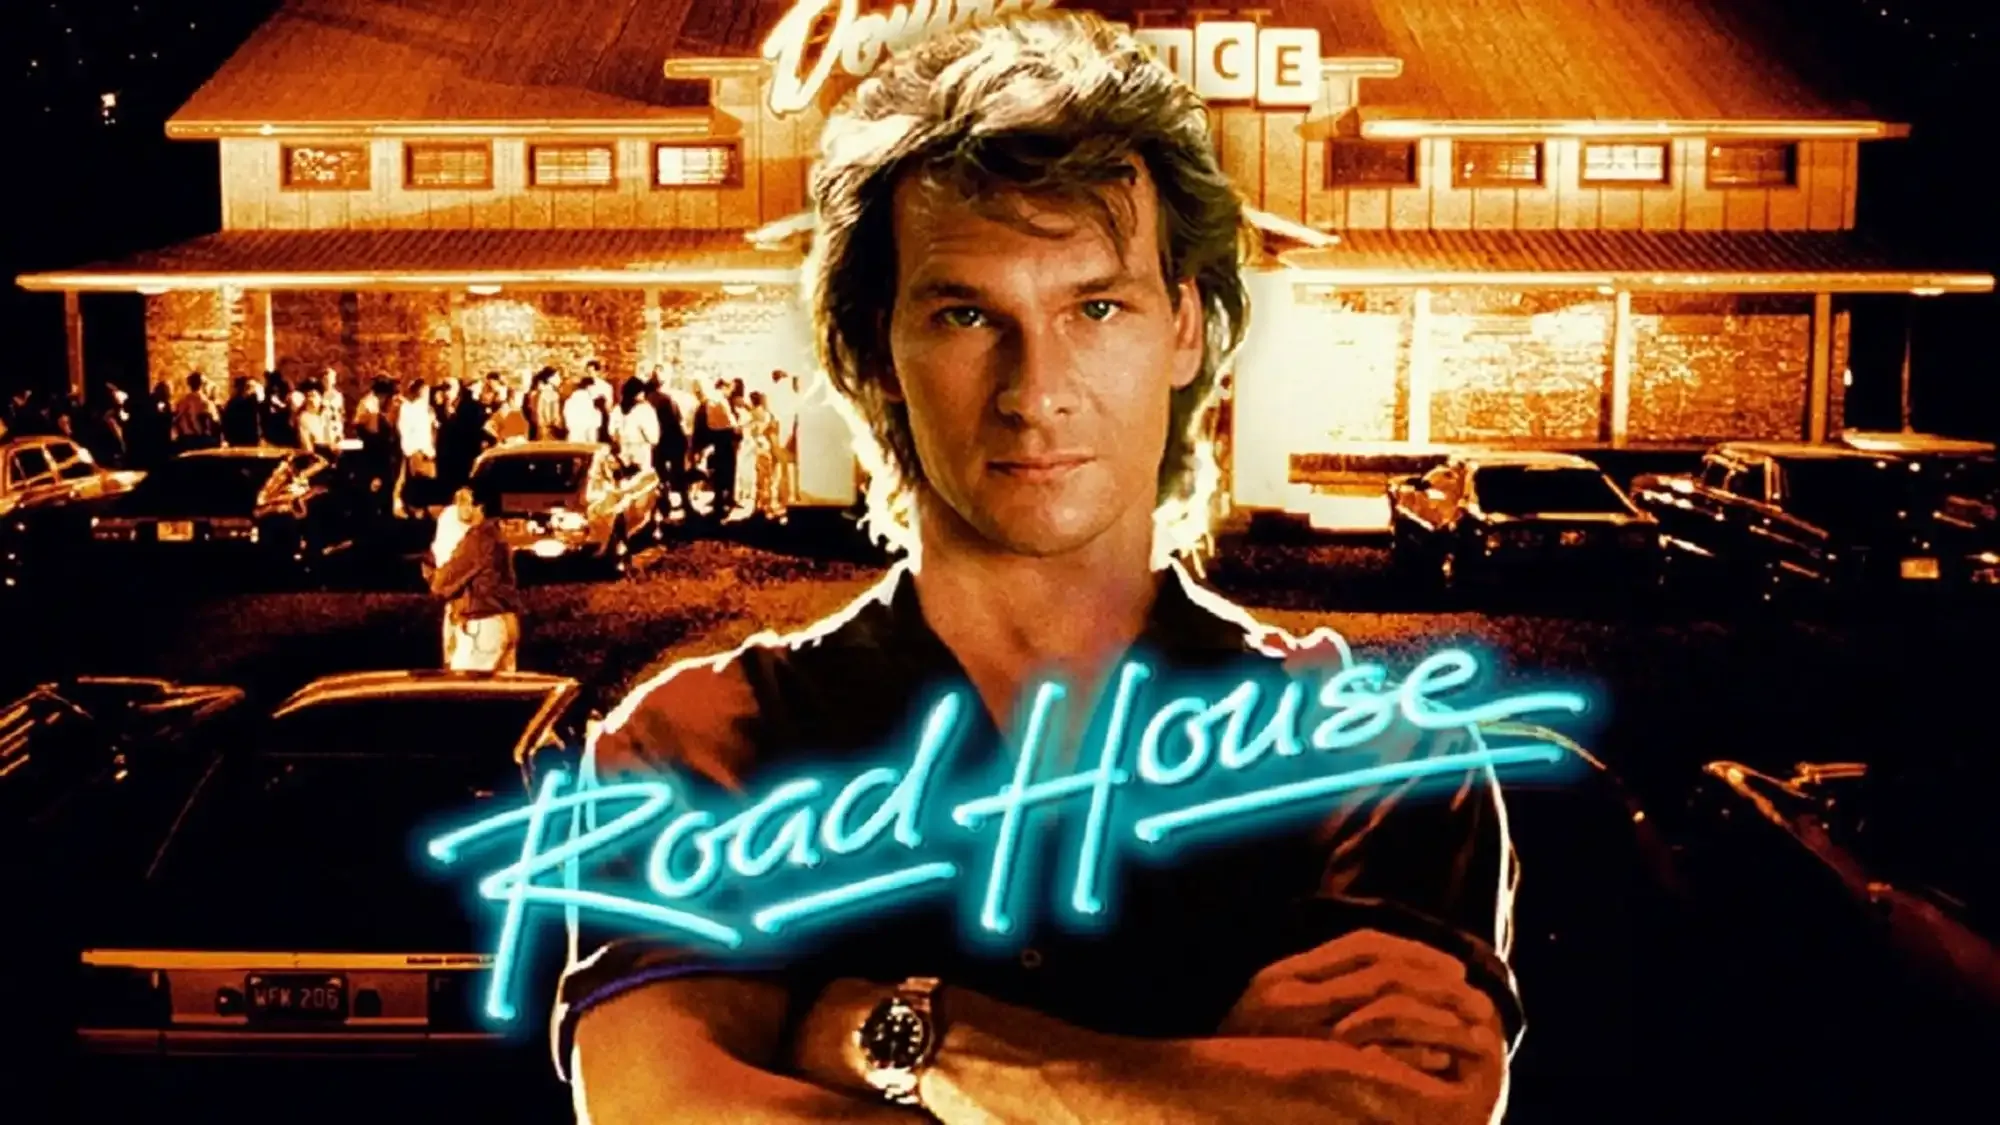 Road House movie review